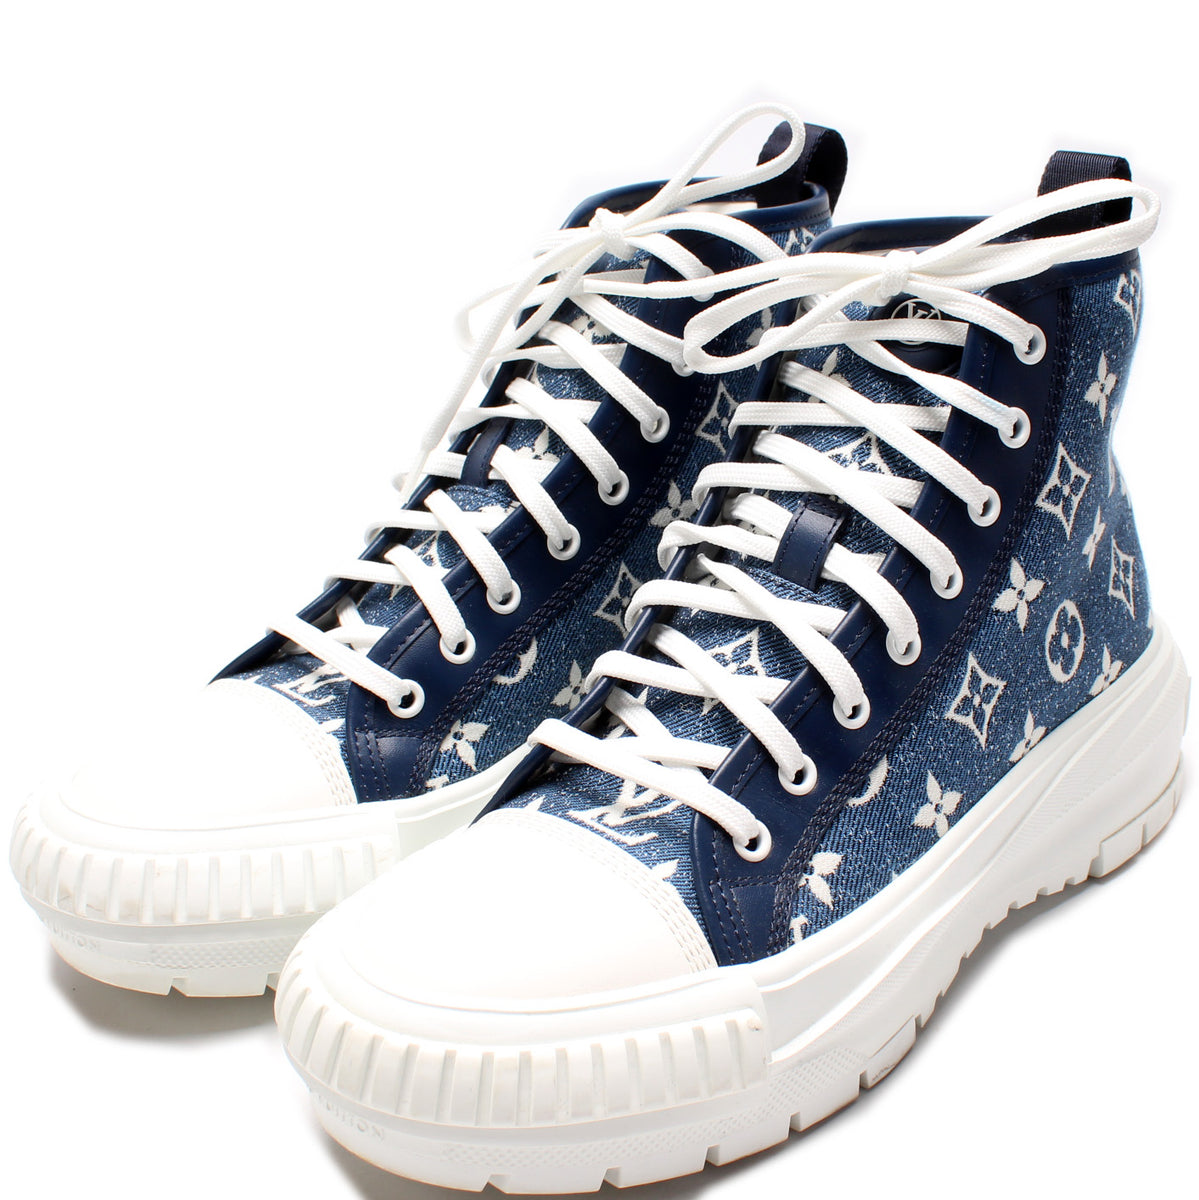 ALL OFFERS CONSIDERED! AUTHENTIC Louis Vuitton Squad Sneaker Boot Size 38